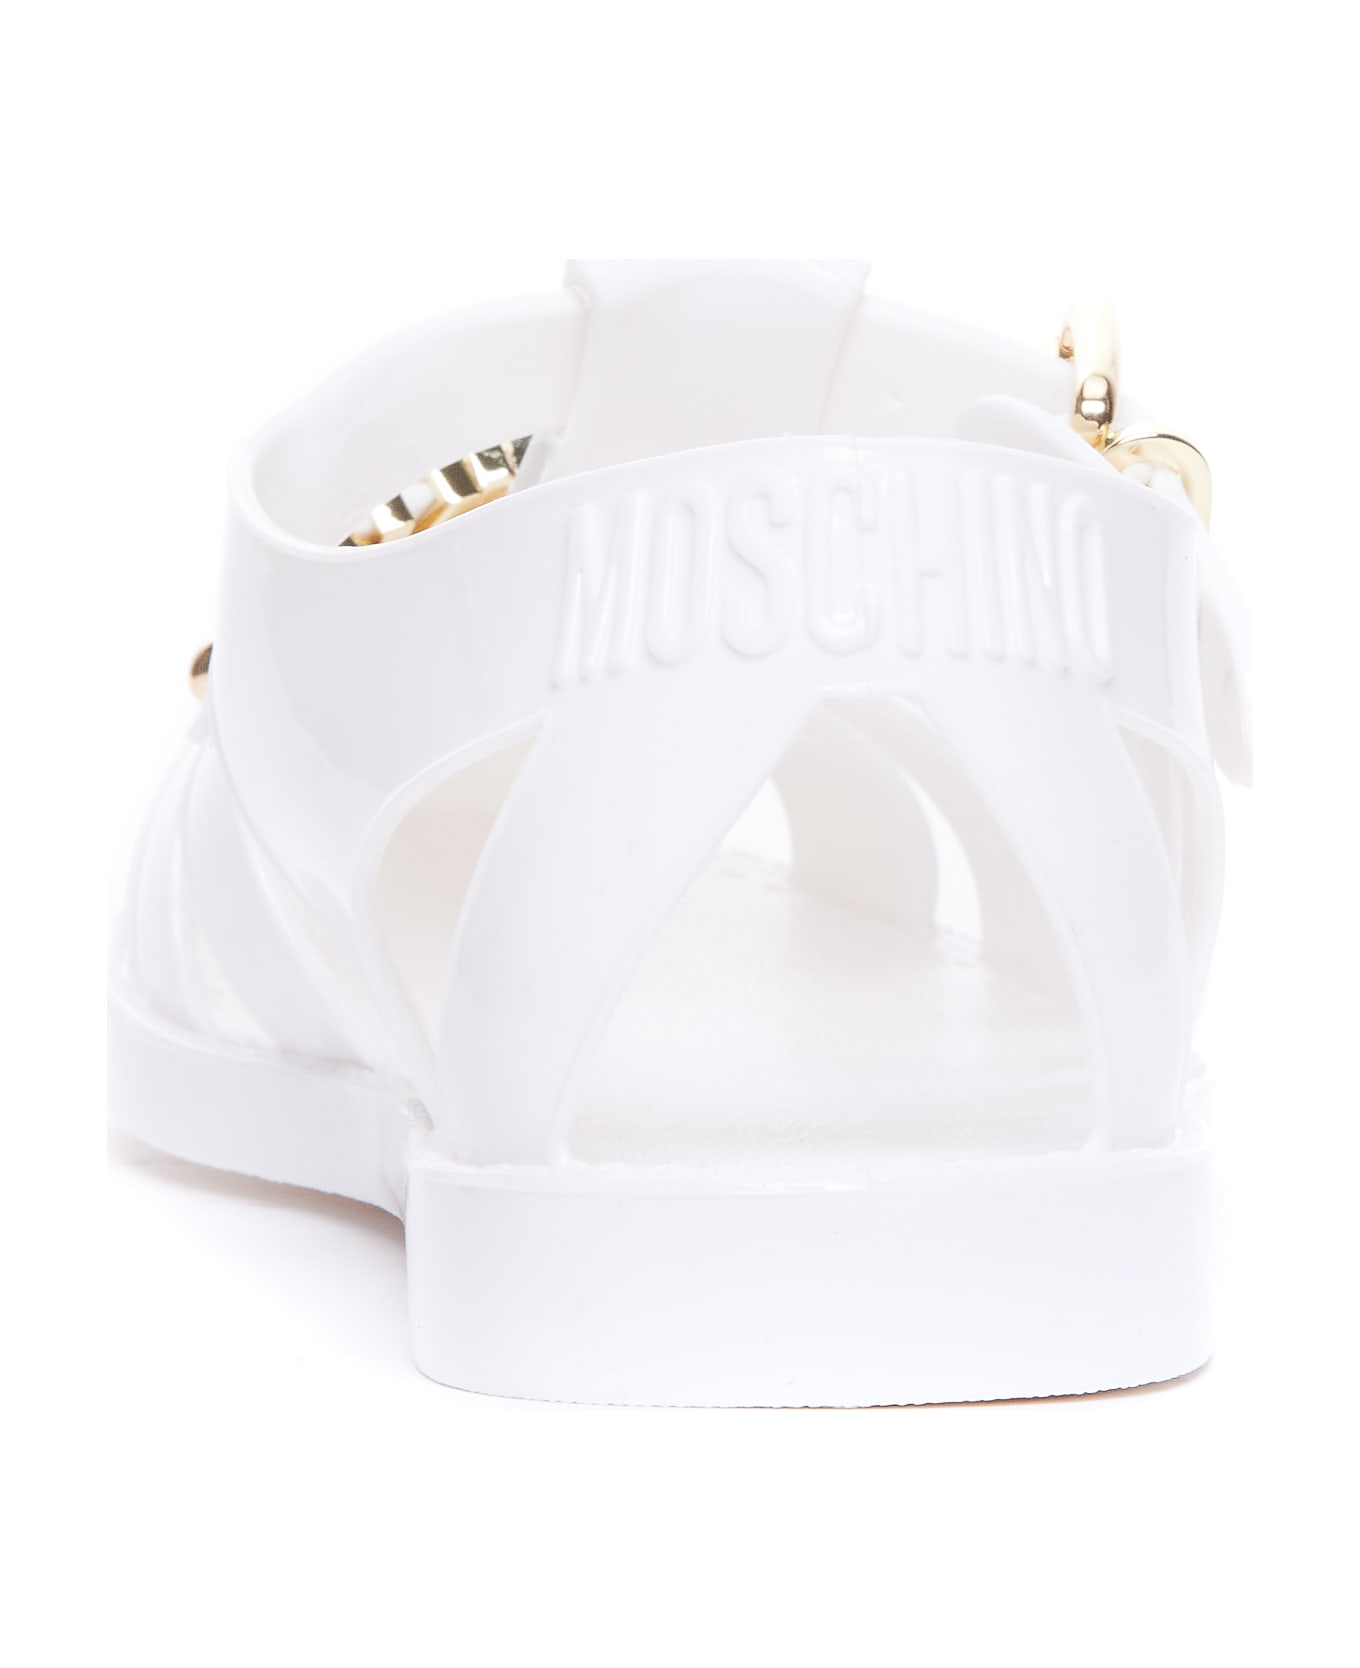 Moschino Jelly Sandals With Lettering Logo - White